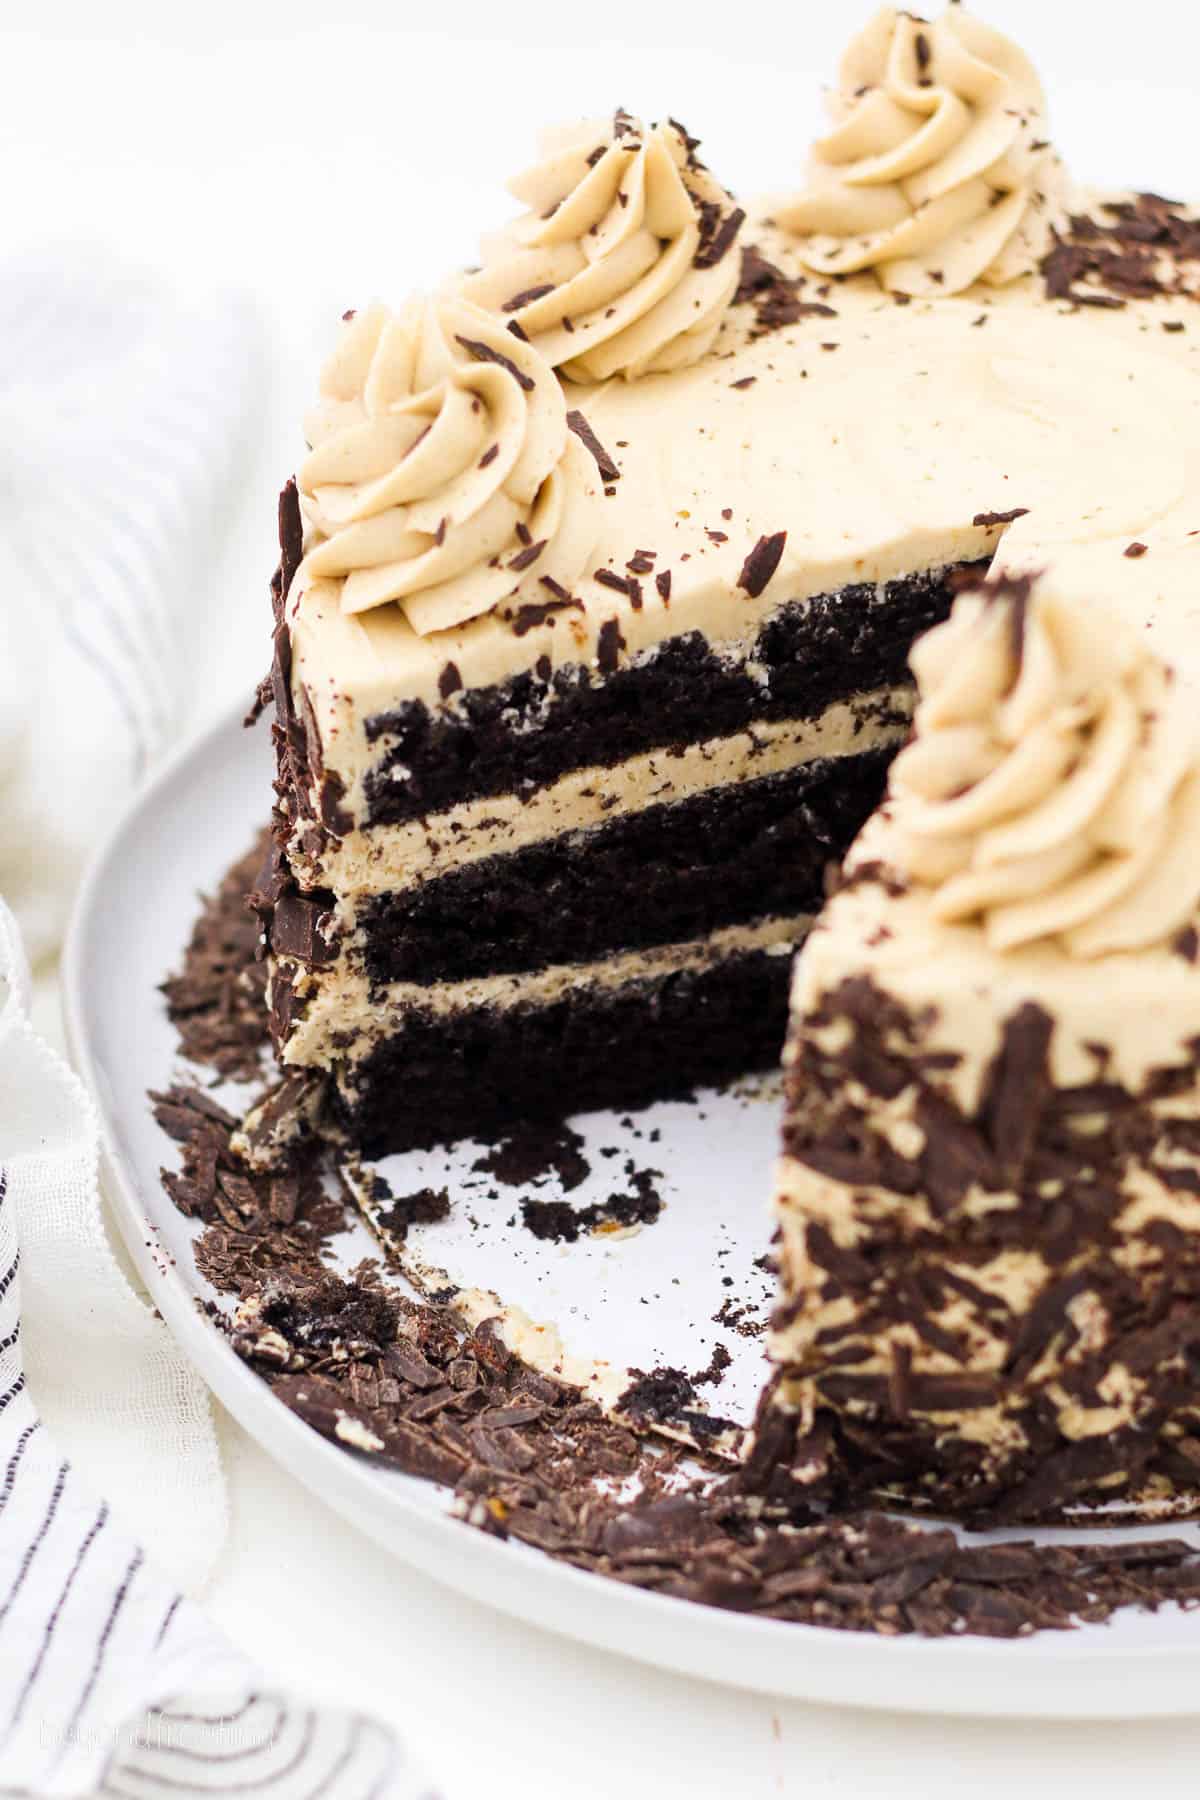 A frosted and decorated chocolate mocha cake with a slice missing.